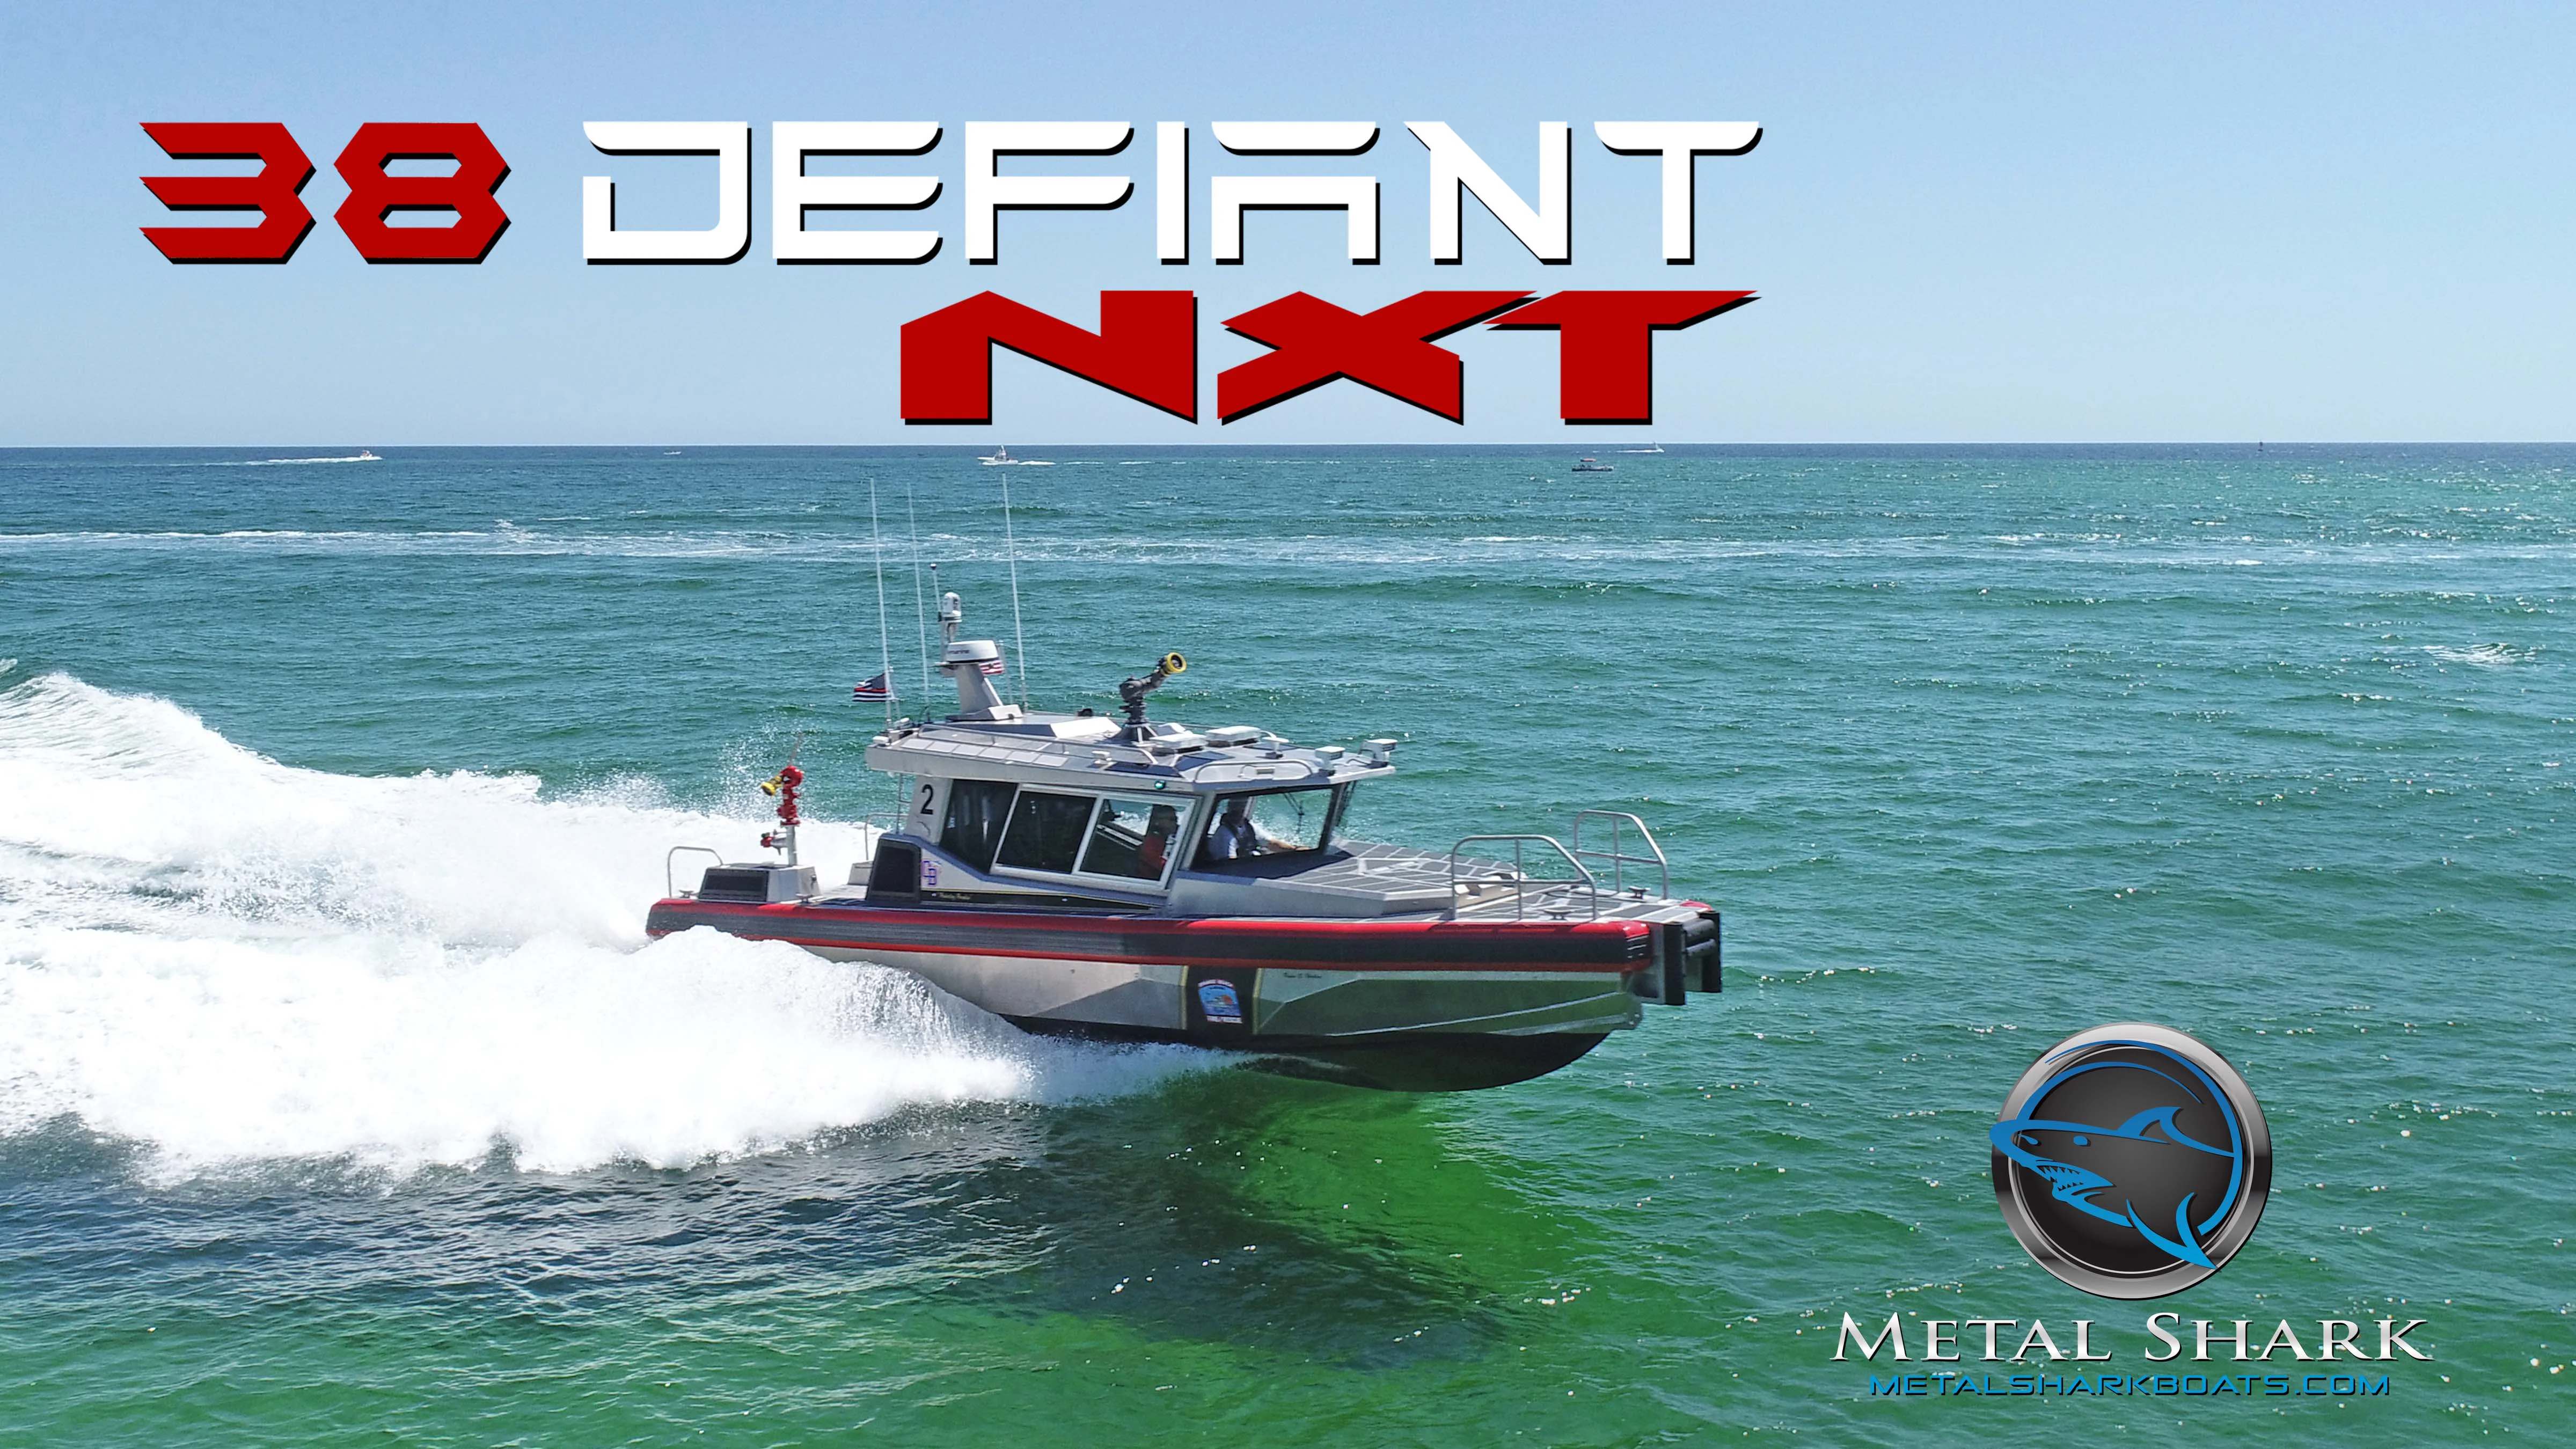 Metal Shark Yachts – The Ultimate Expression of Personal Independence